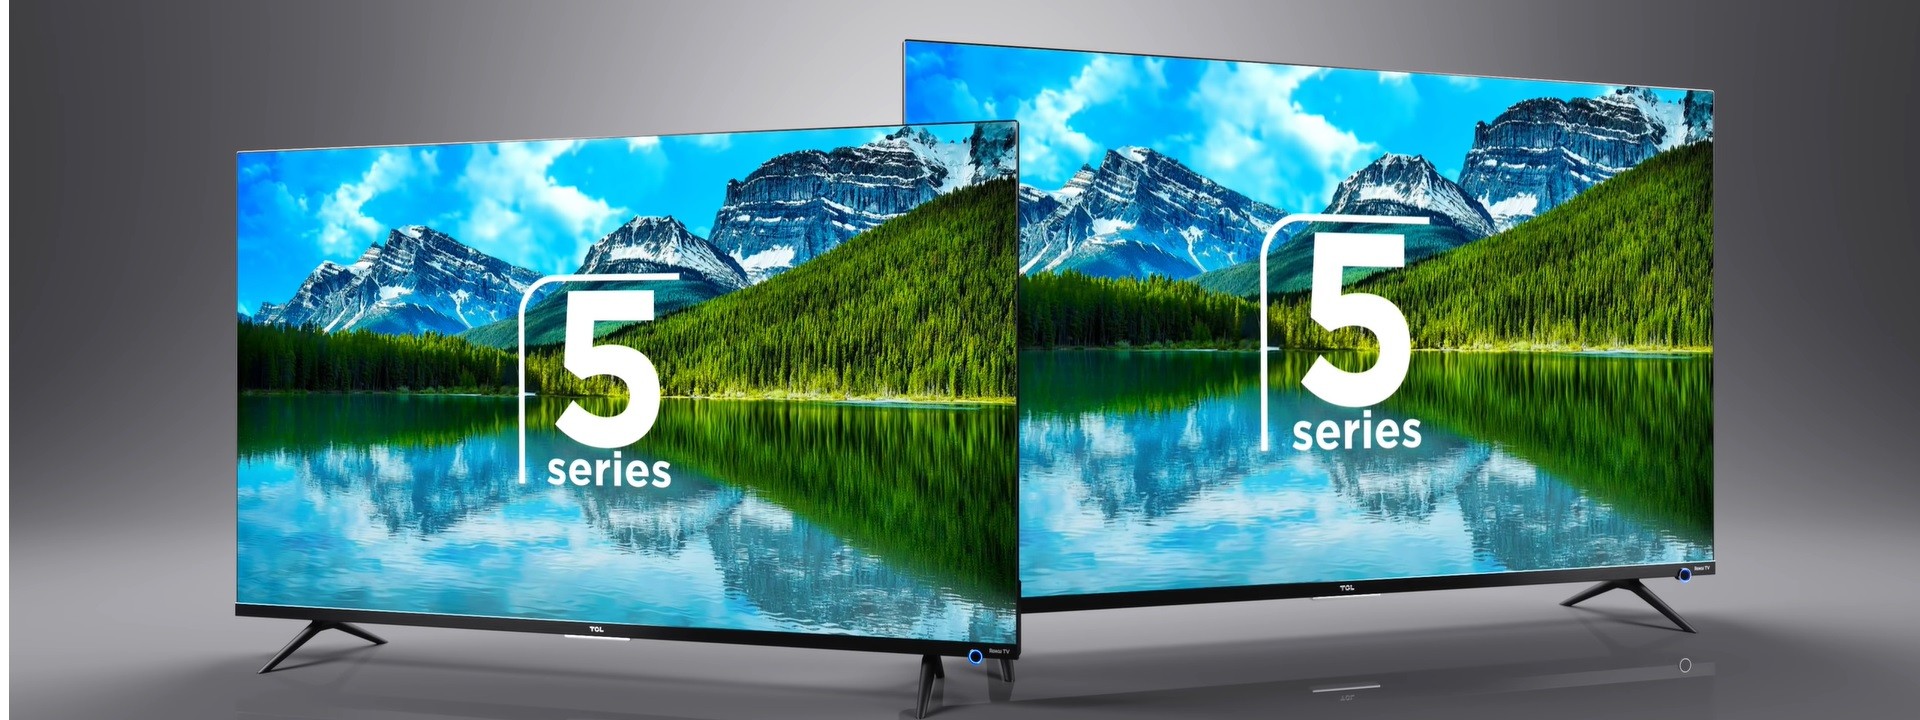 TCL’s 5-Series 4K QLED Smart TVs are currently on sale